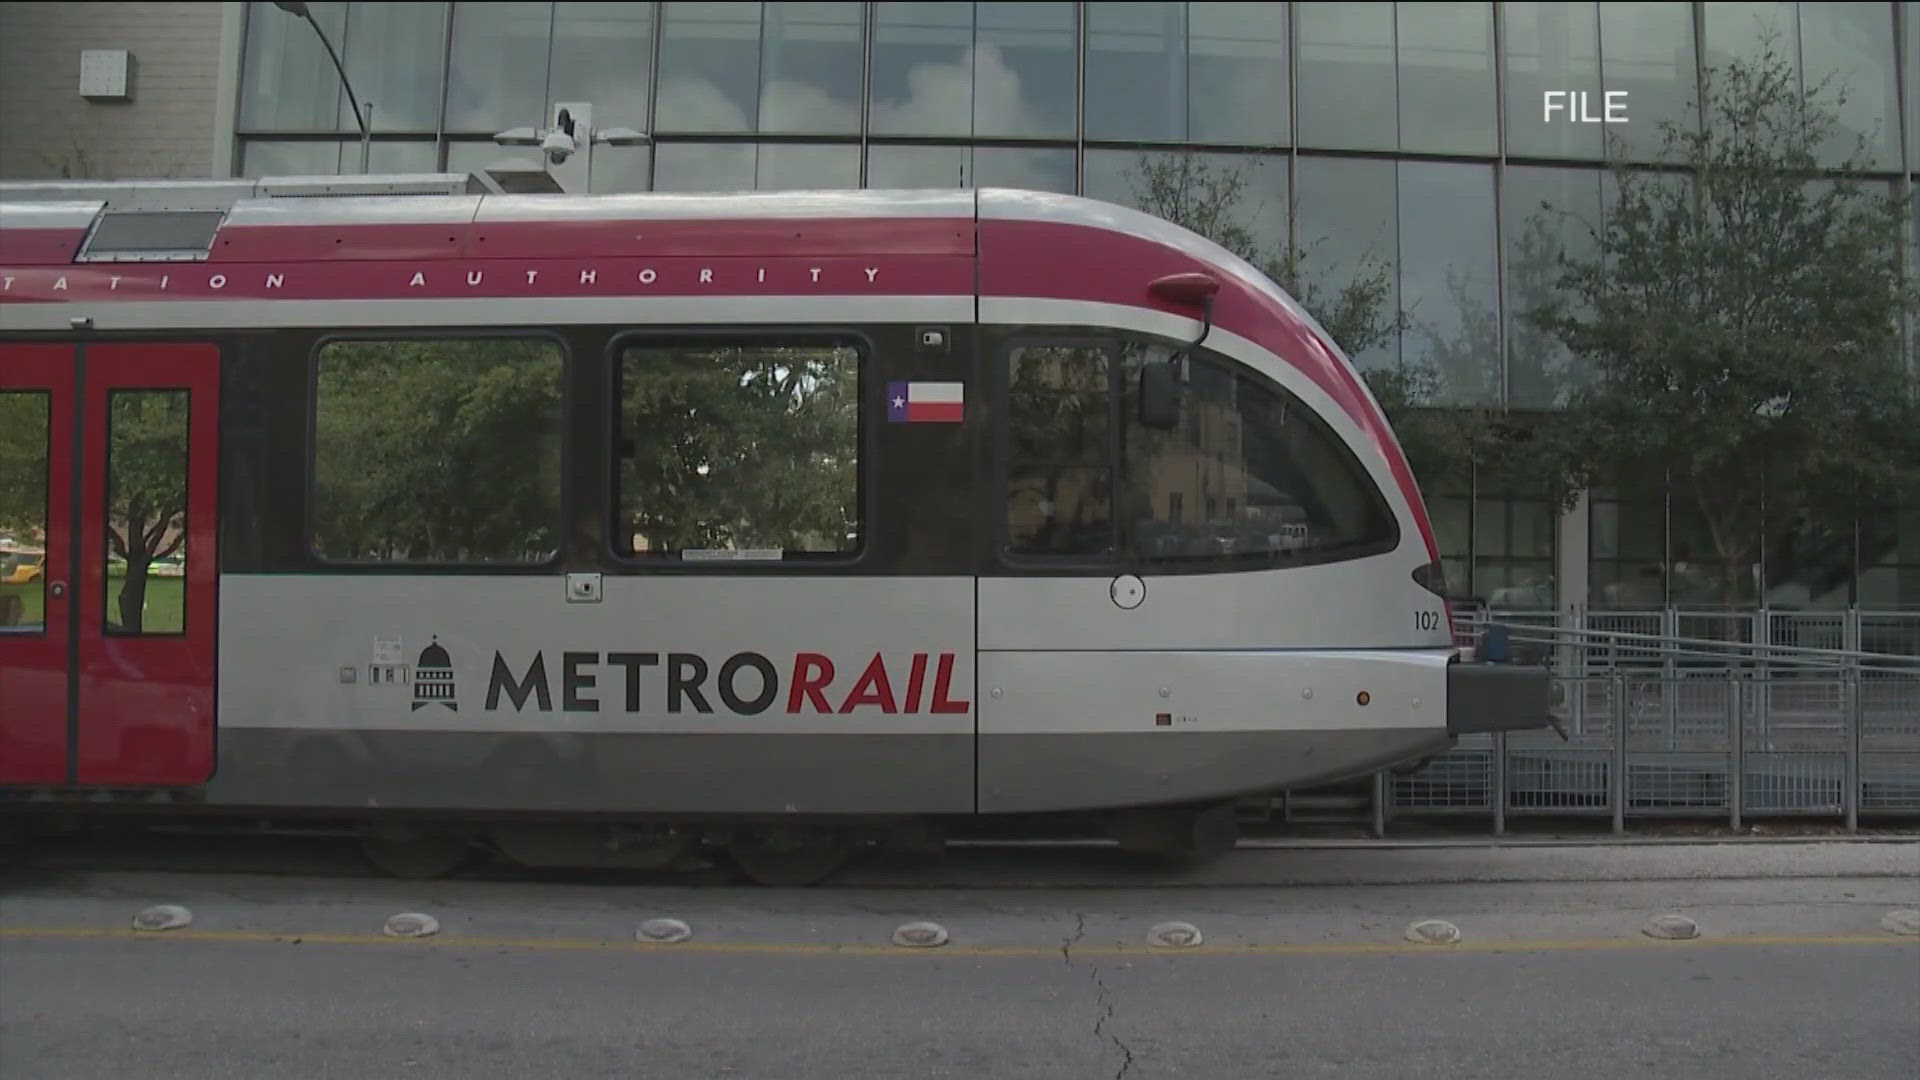 Transit leaders say they plan to start hiring in the coming months.